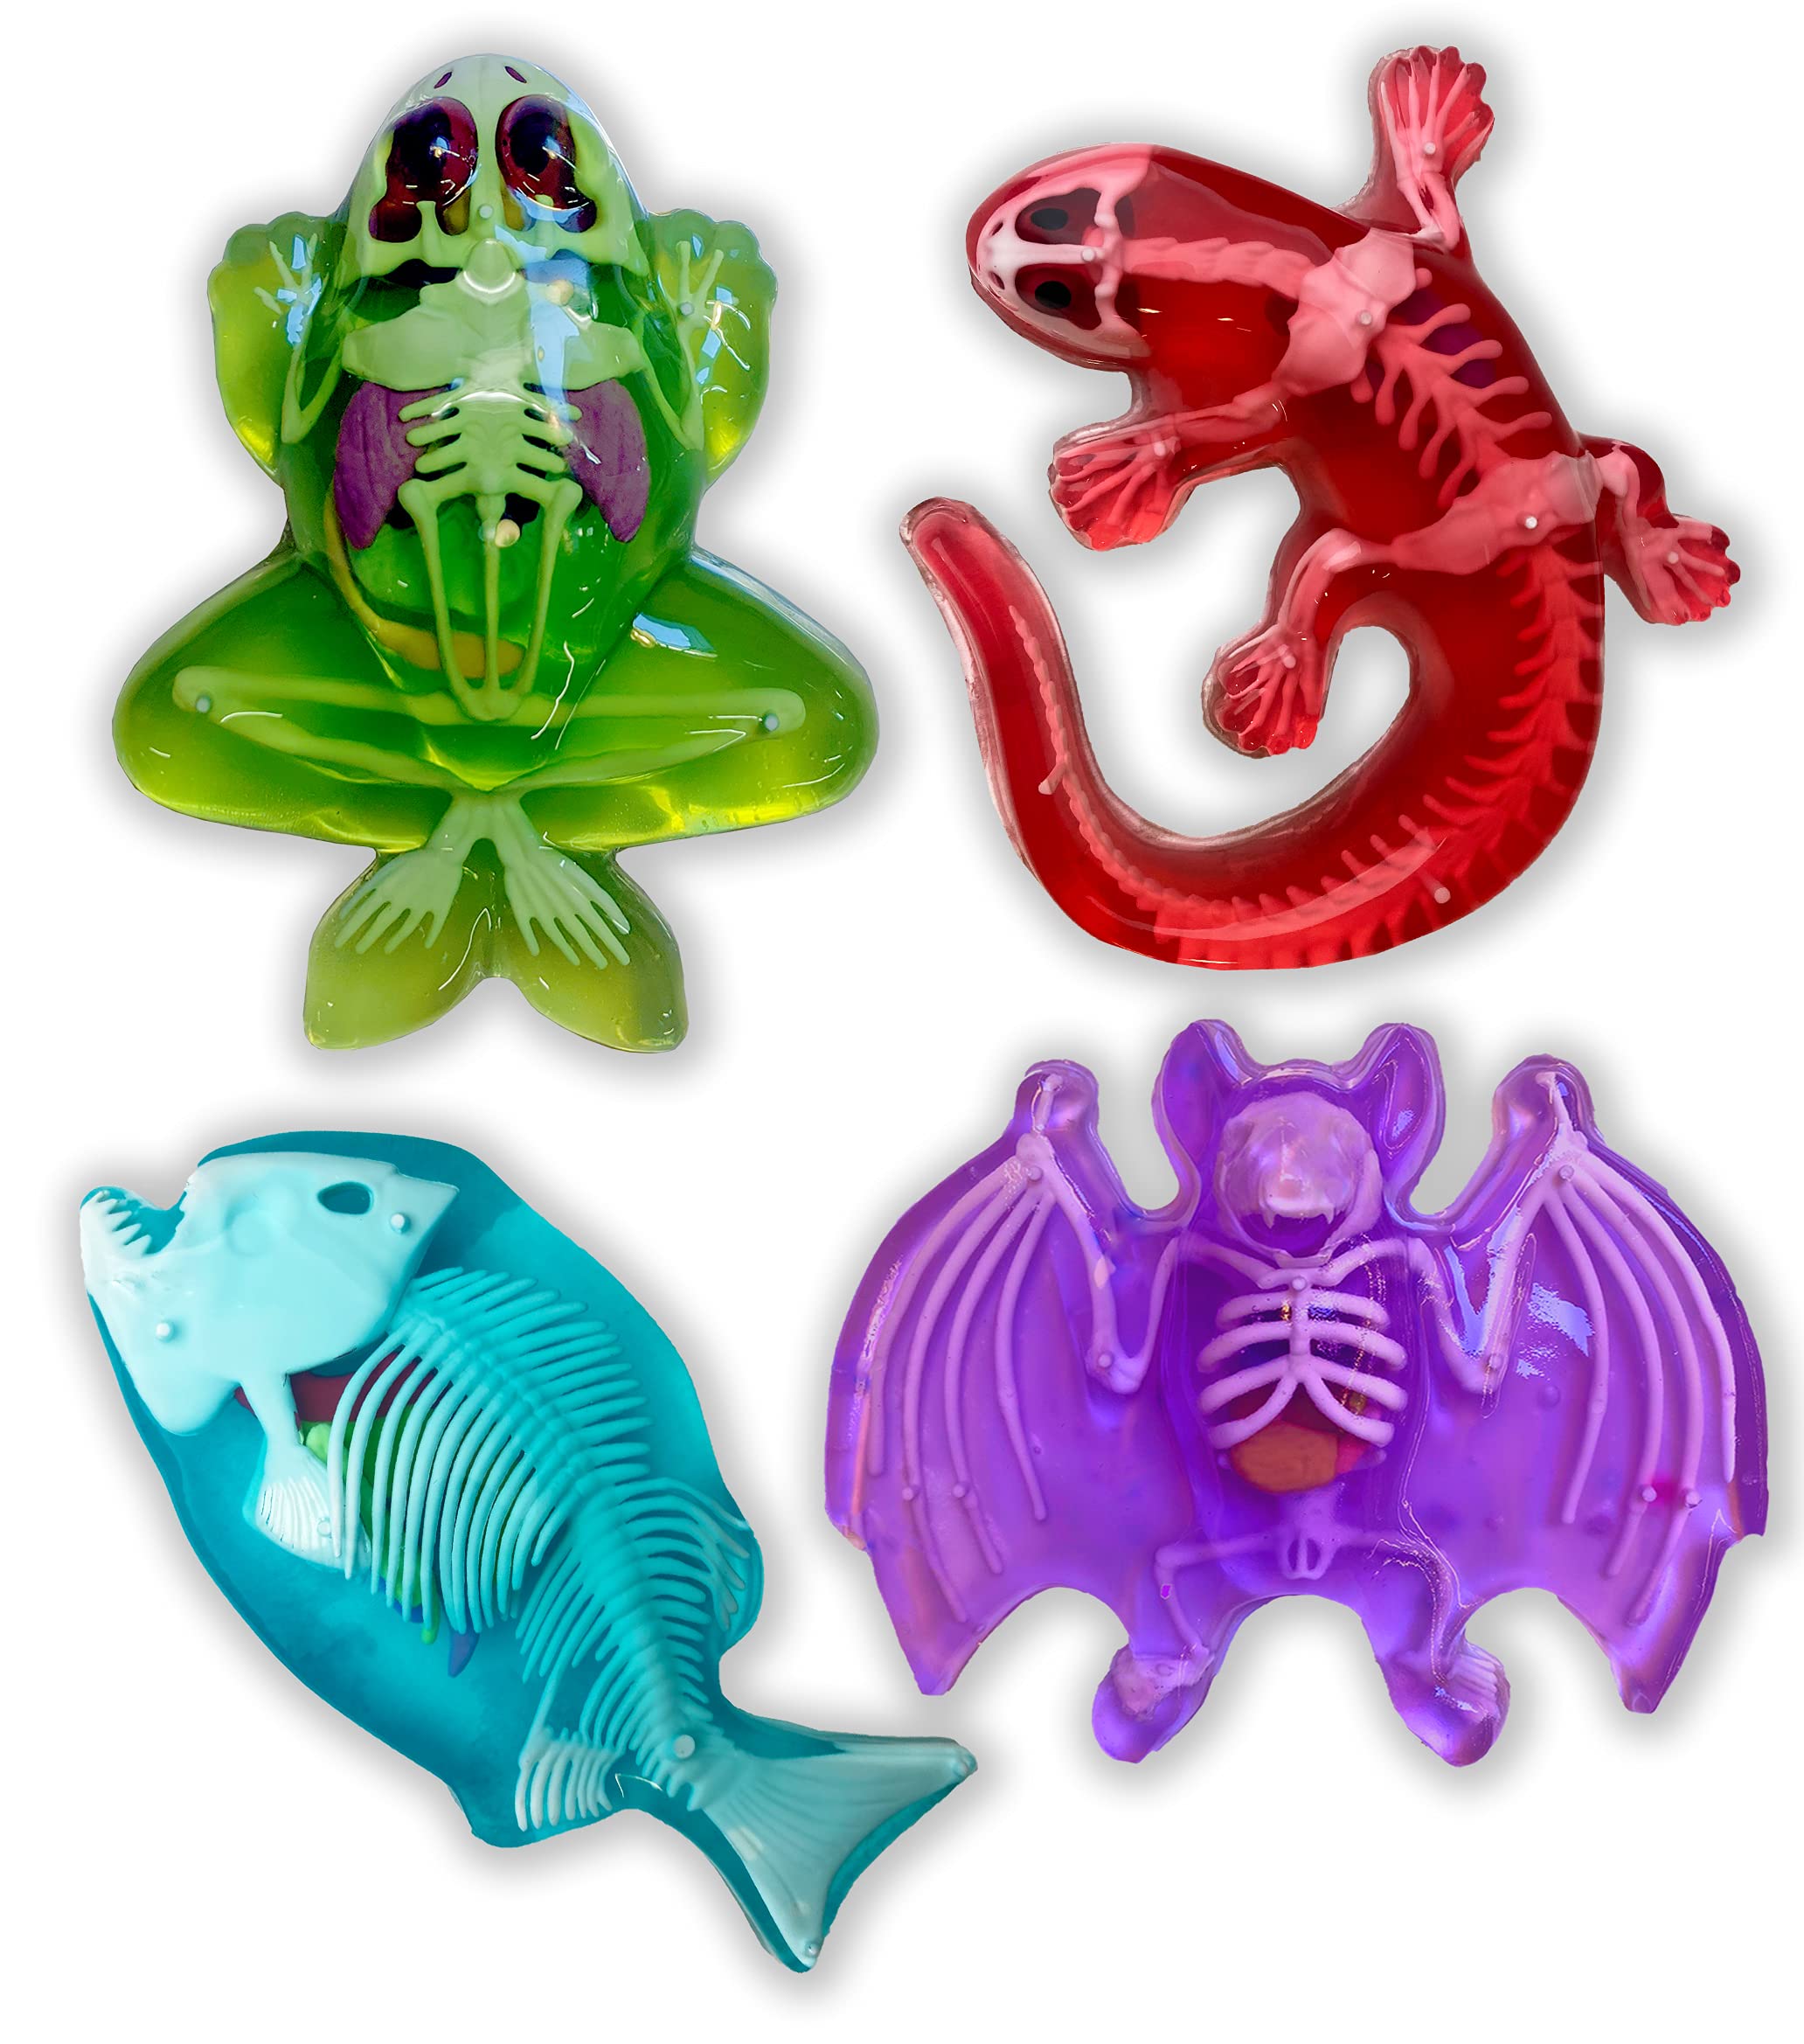 Dissect-It Simulated Synthetic Lab Dissection Toy, STEM Projects for Kids Ages 6+, Animal Science, Biology, Anatomy Home Learning Kits - Complete Set of 4 (Frog, Salamander, Piranha, & Bat)